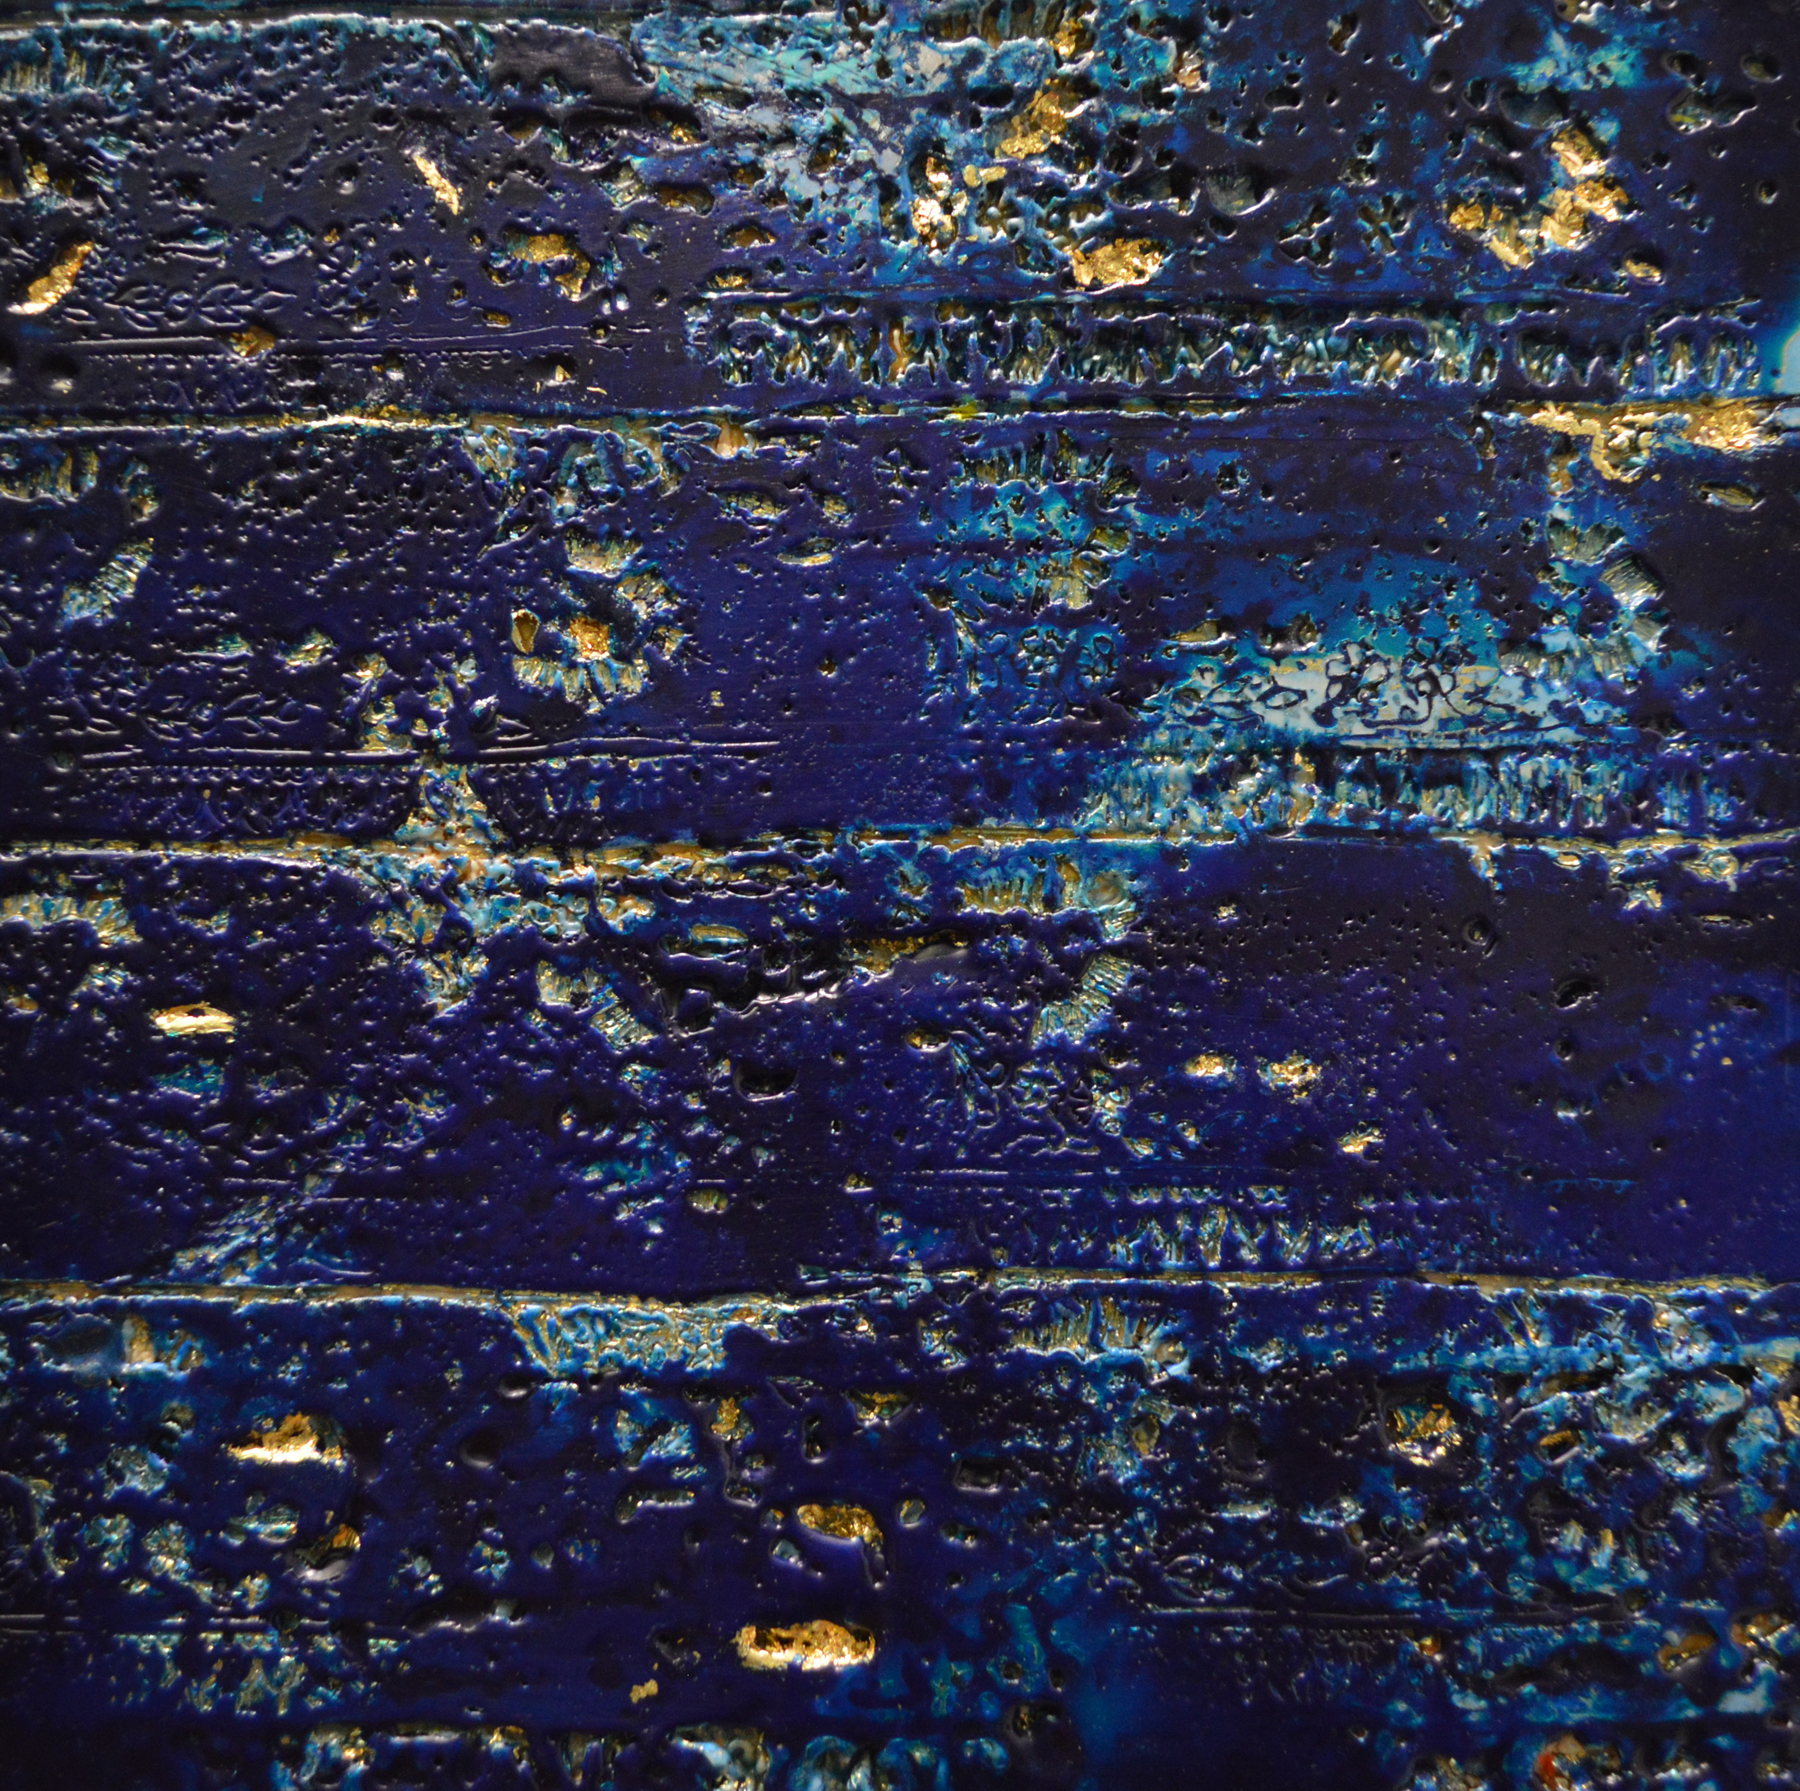 Nocturne is a deep blue and gold pieces inspired by the night.